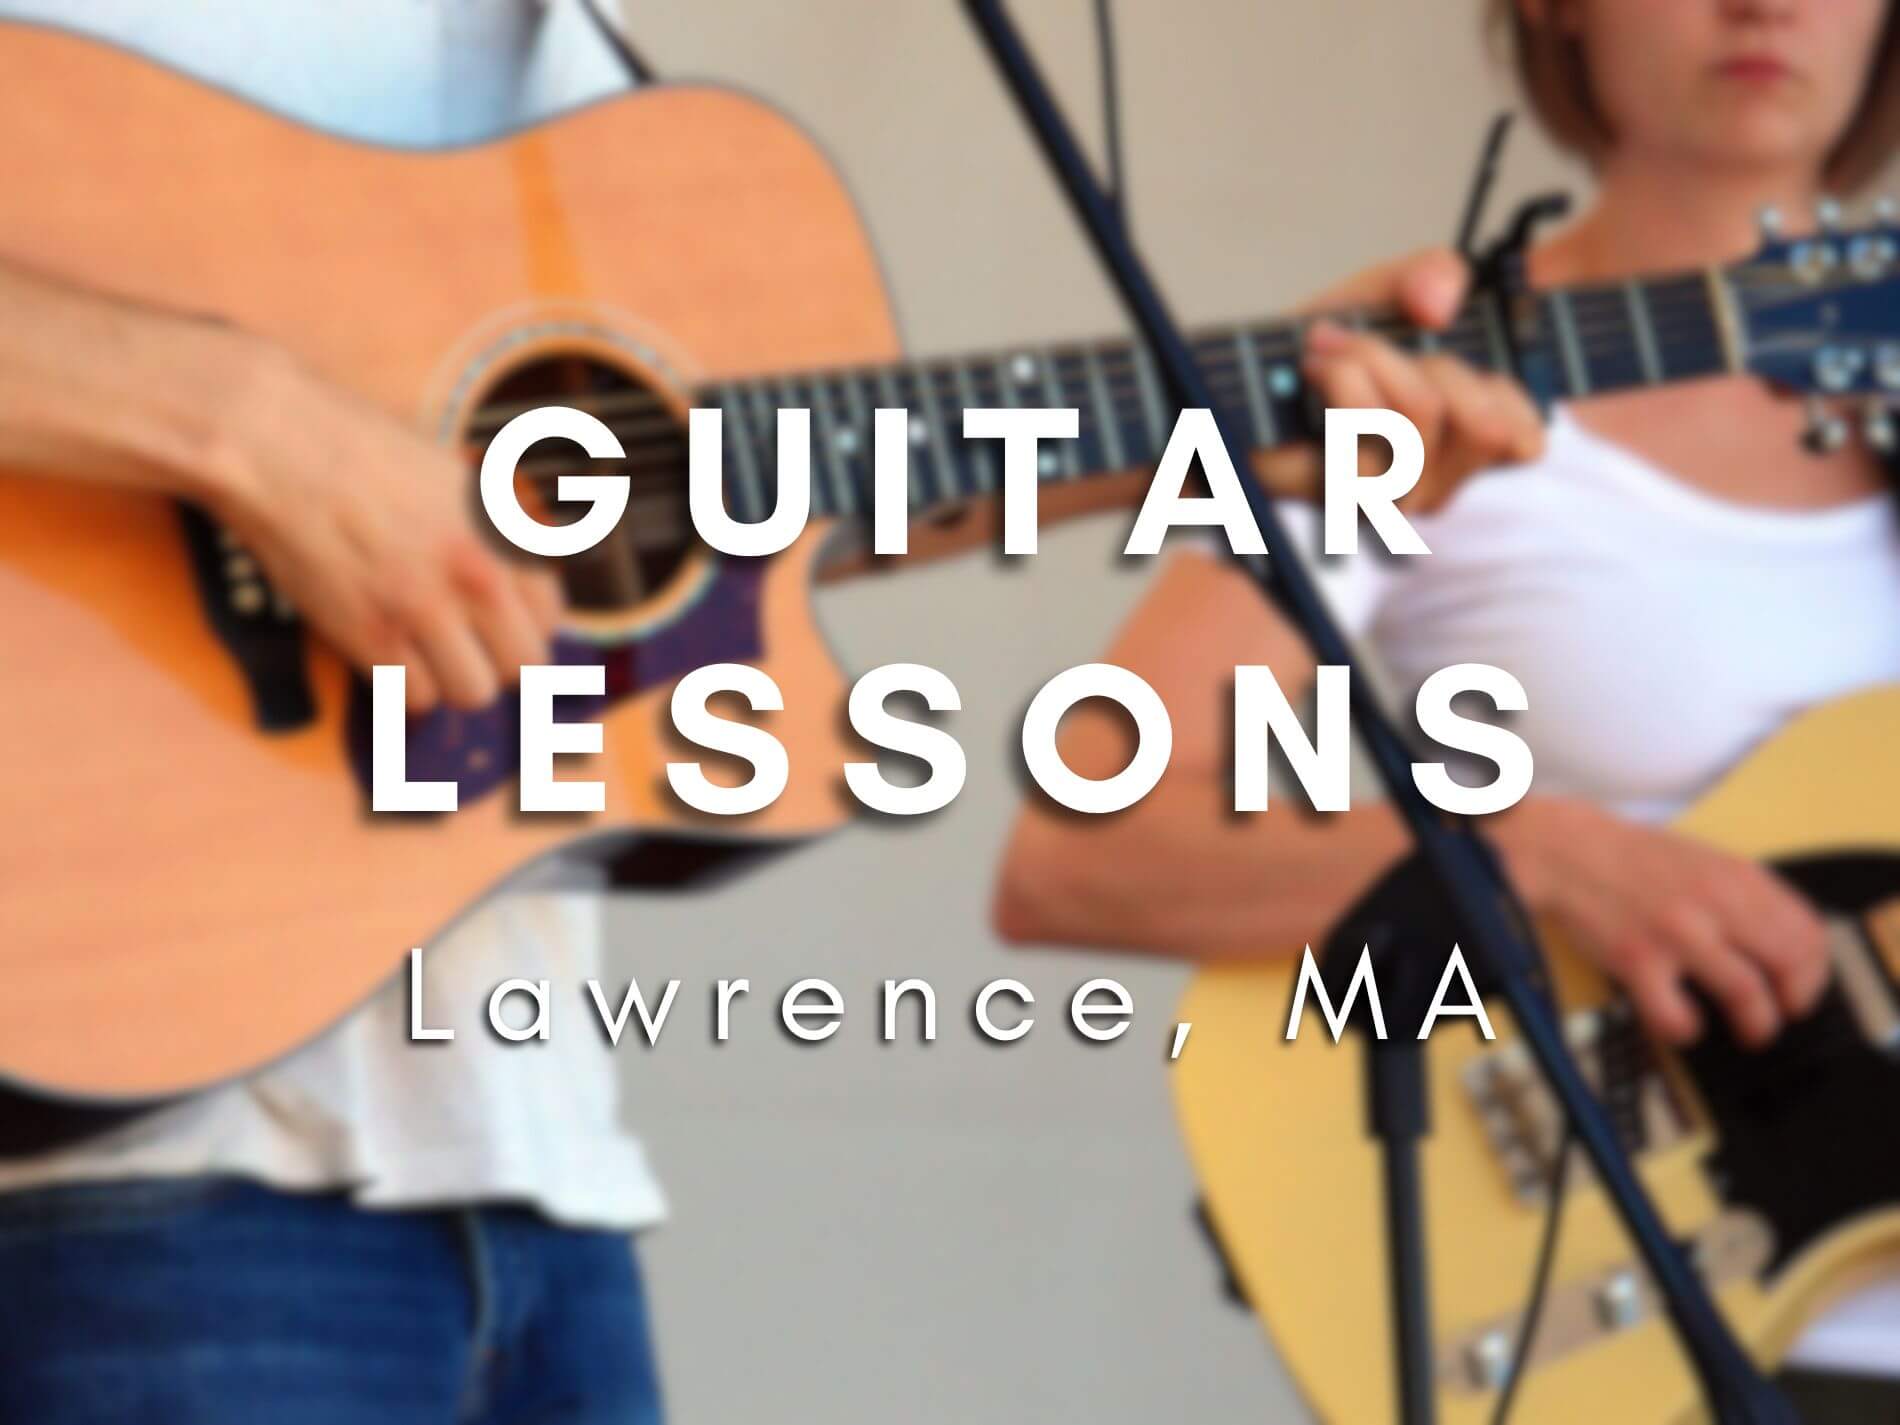 Guitar Lessons in Lawrence, Massachusetts: Learn to Play Guitar with Expert Instruction